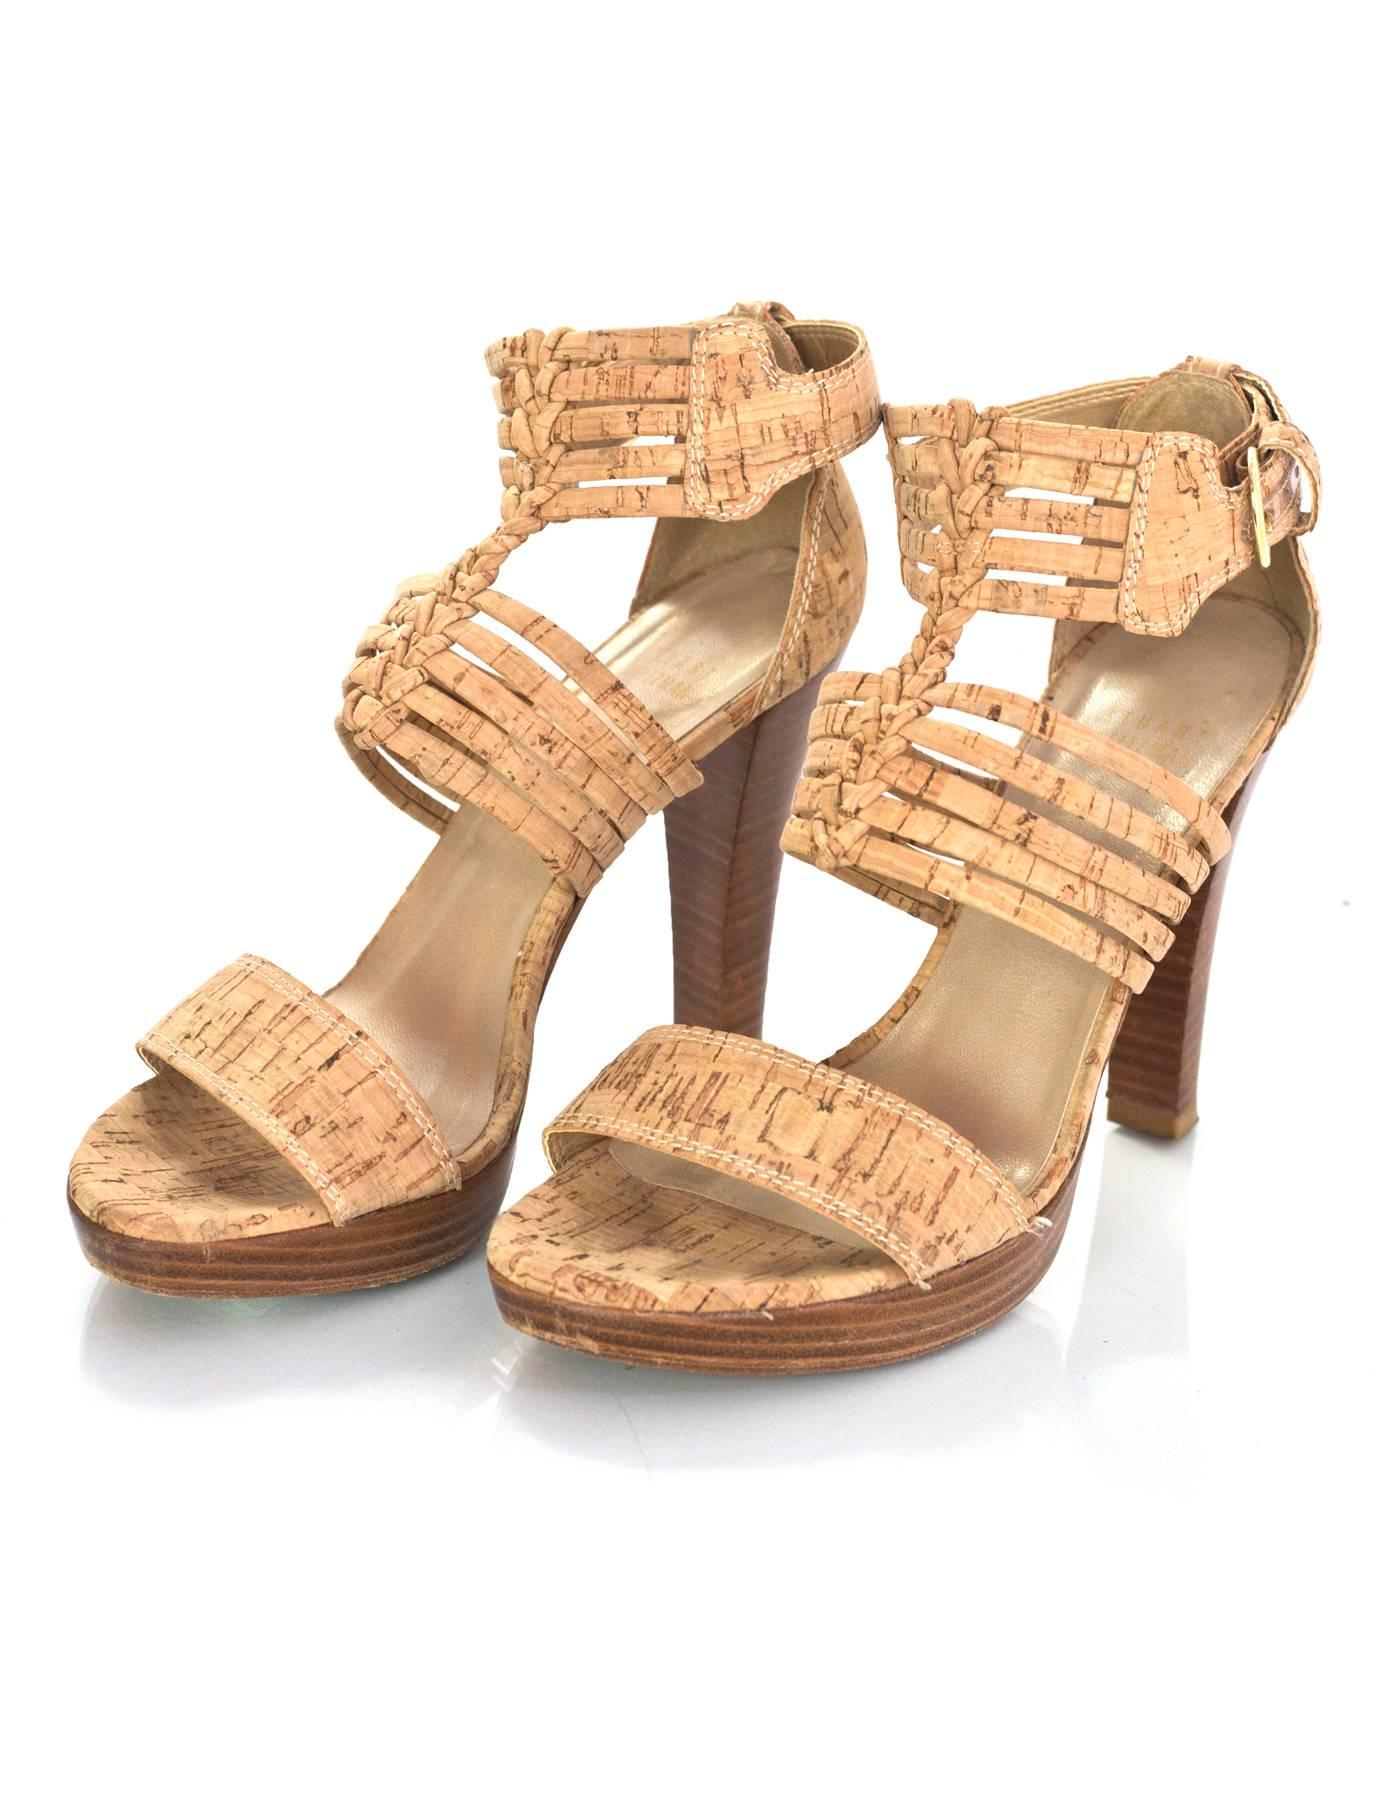 Stuart Weitzman Cork Sandals Sz 8

Color: Tan
Materials: Cork
Closure/Opening: Buckle closure at ankle
Sole Stamp: Stuart Weitzman 8
Overall Condition: Excellent pre-owned condition, minor wear at insoles and outsoles

Marked Size: 8
Heel Height: